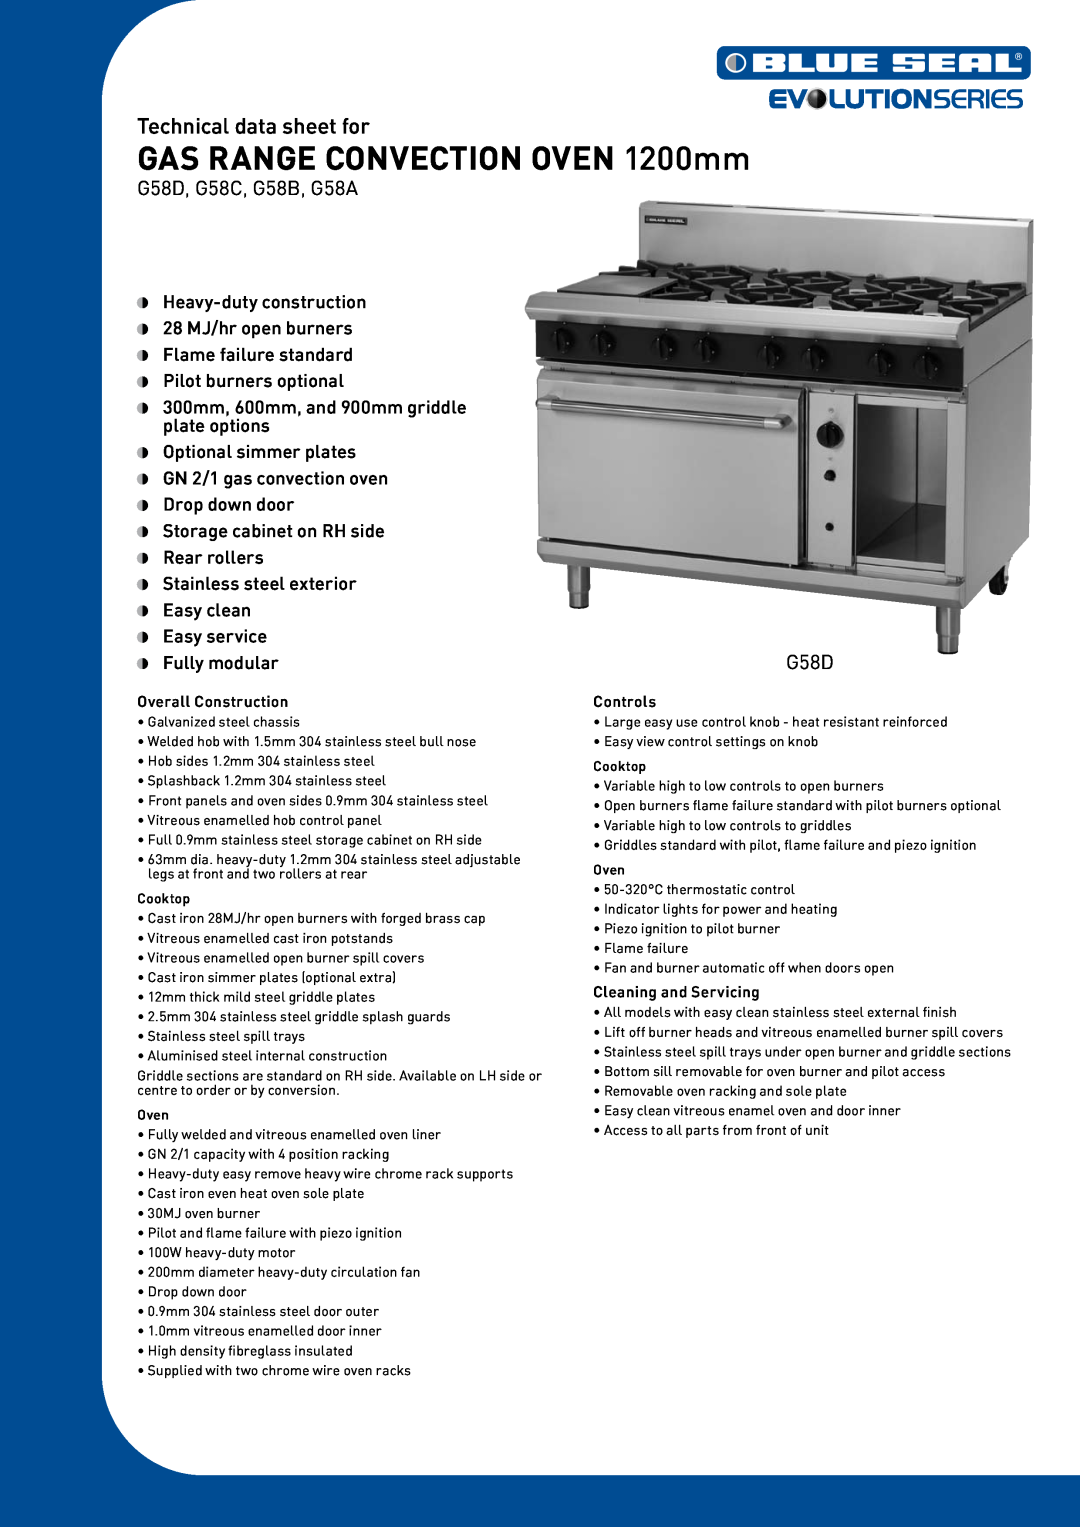 Moffat G58A, G58B manual GAS RANGE CONVECTION OVEN 1200mm, Technical data sheet for, Overall Construction, Controls, G58D 